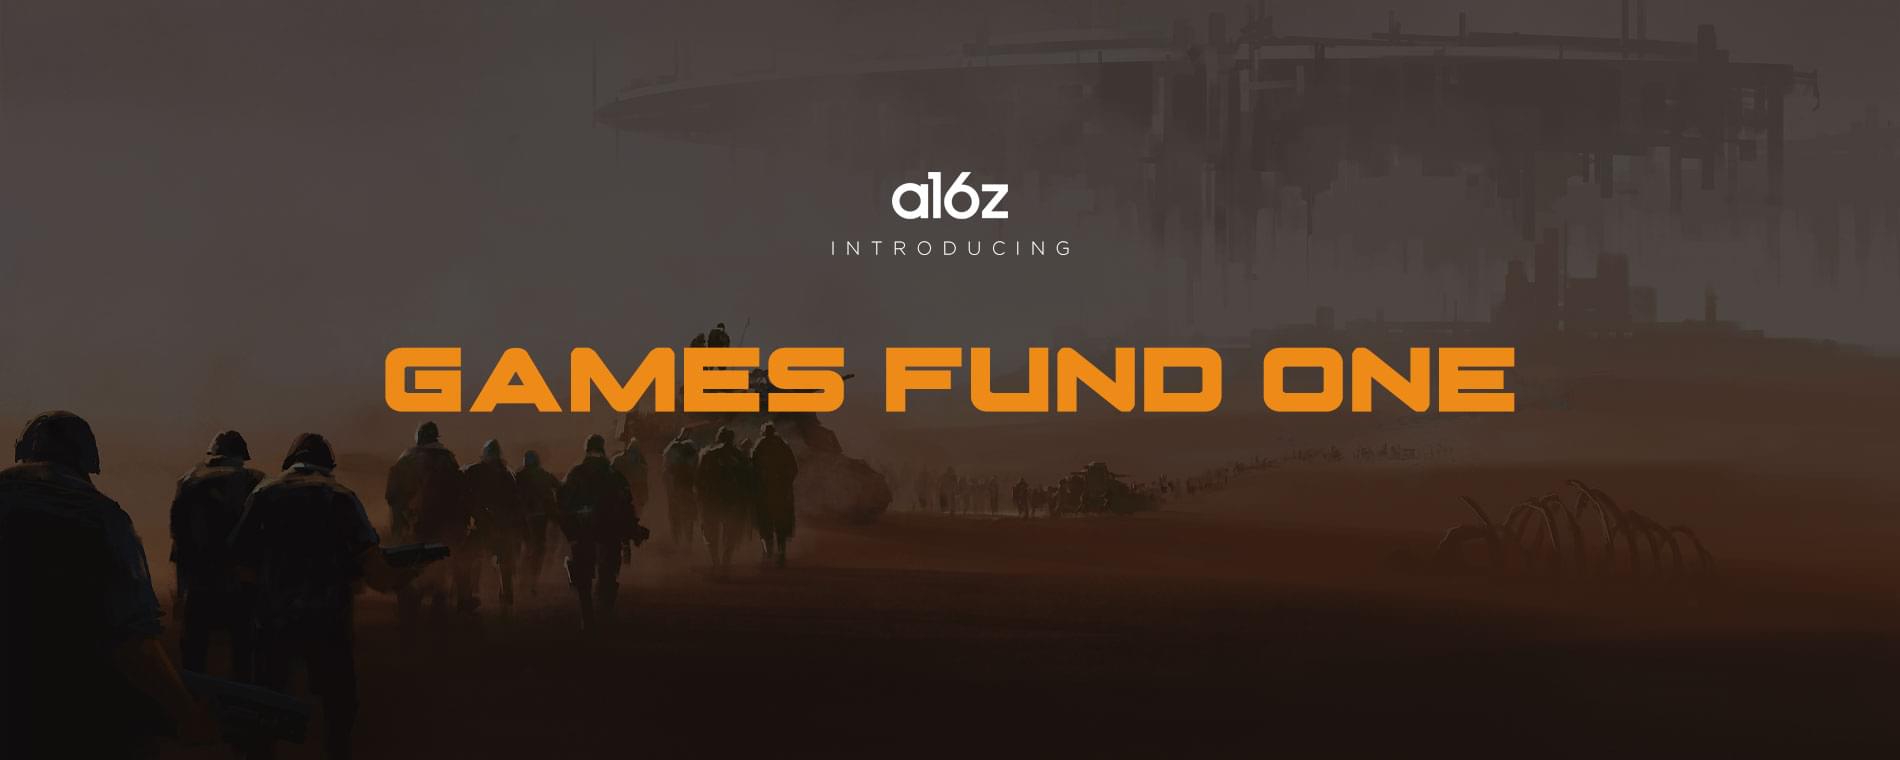 a16z launches $600m gaming fund